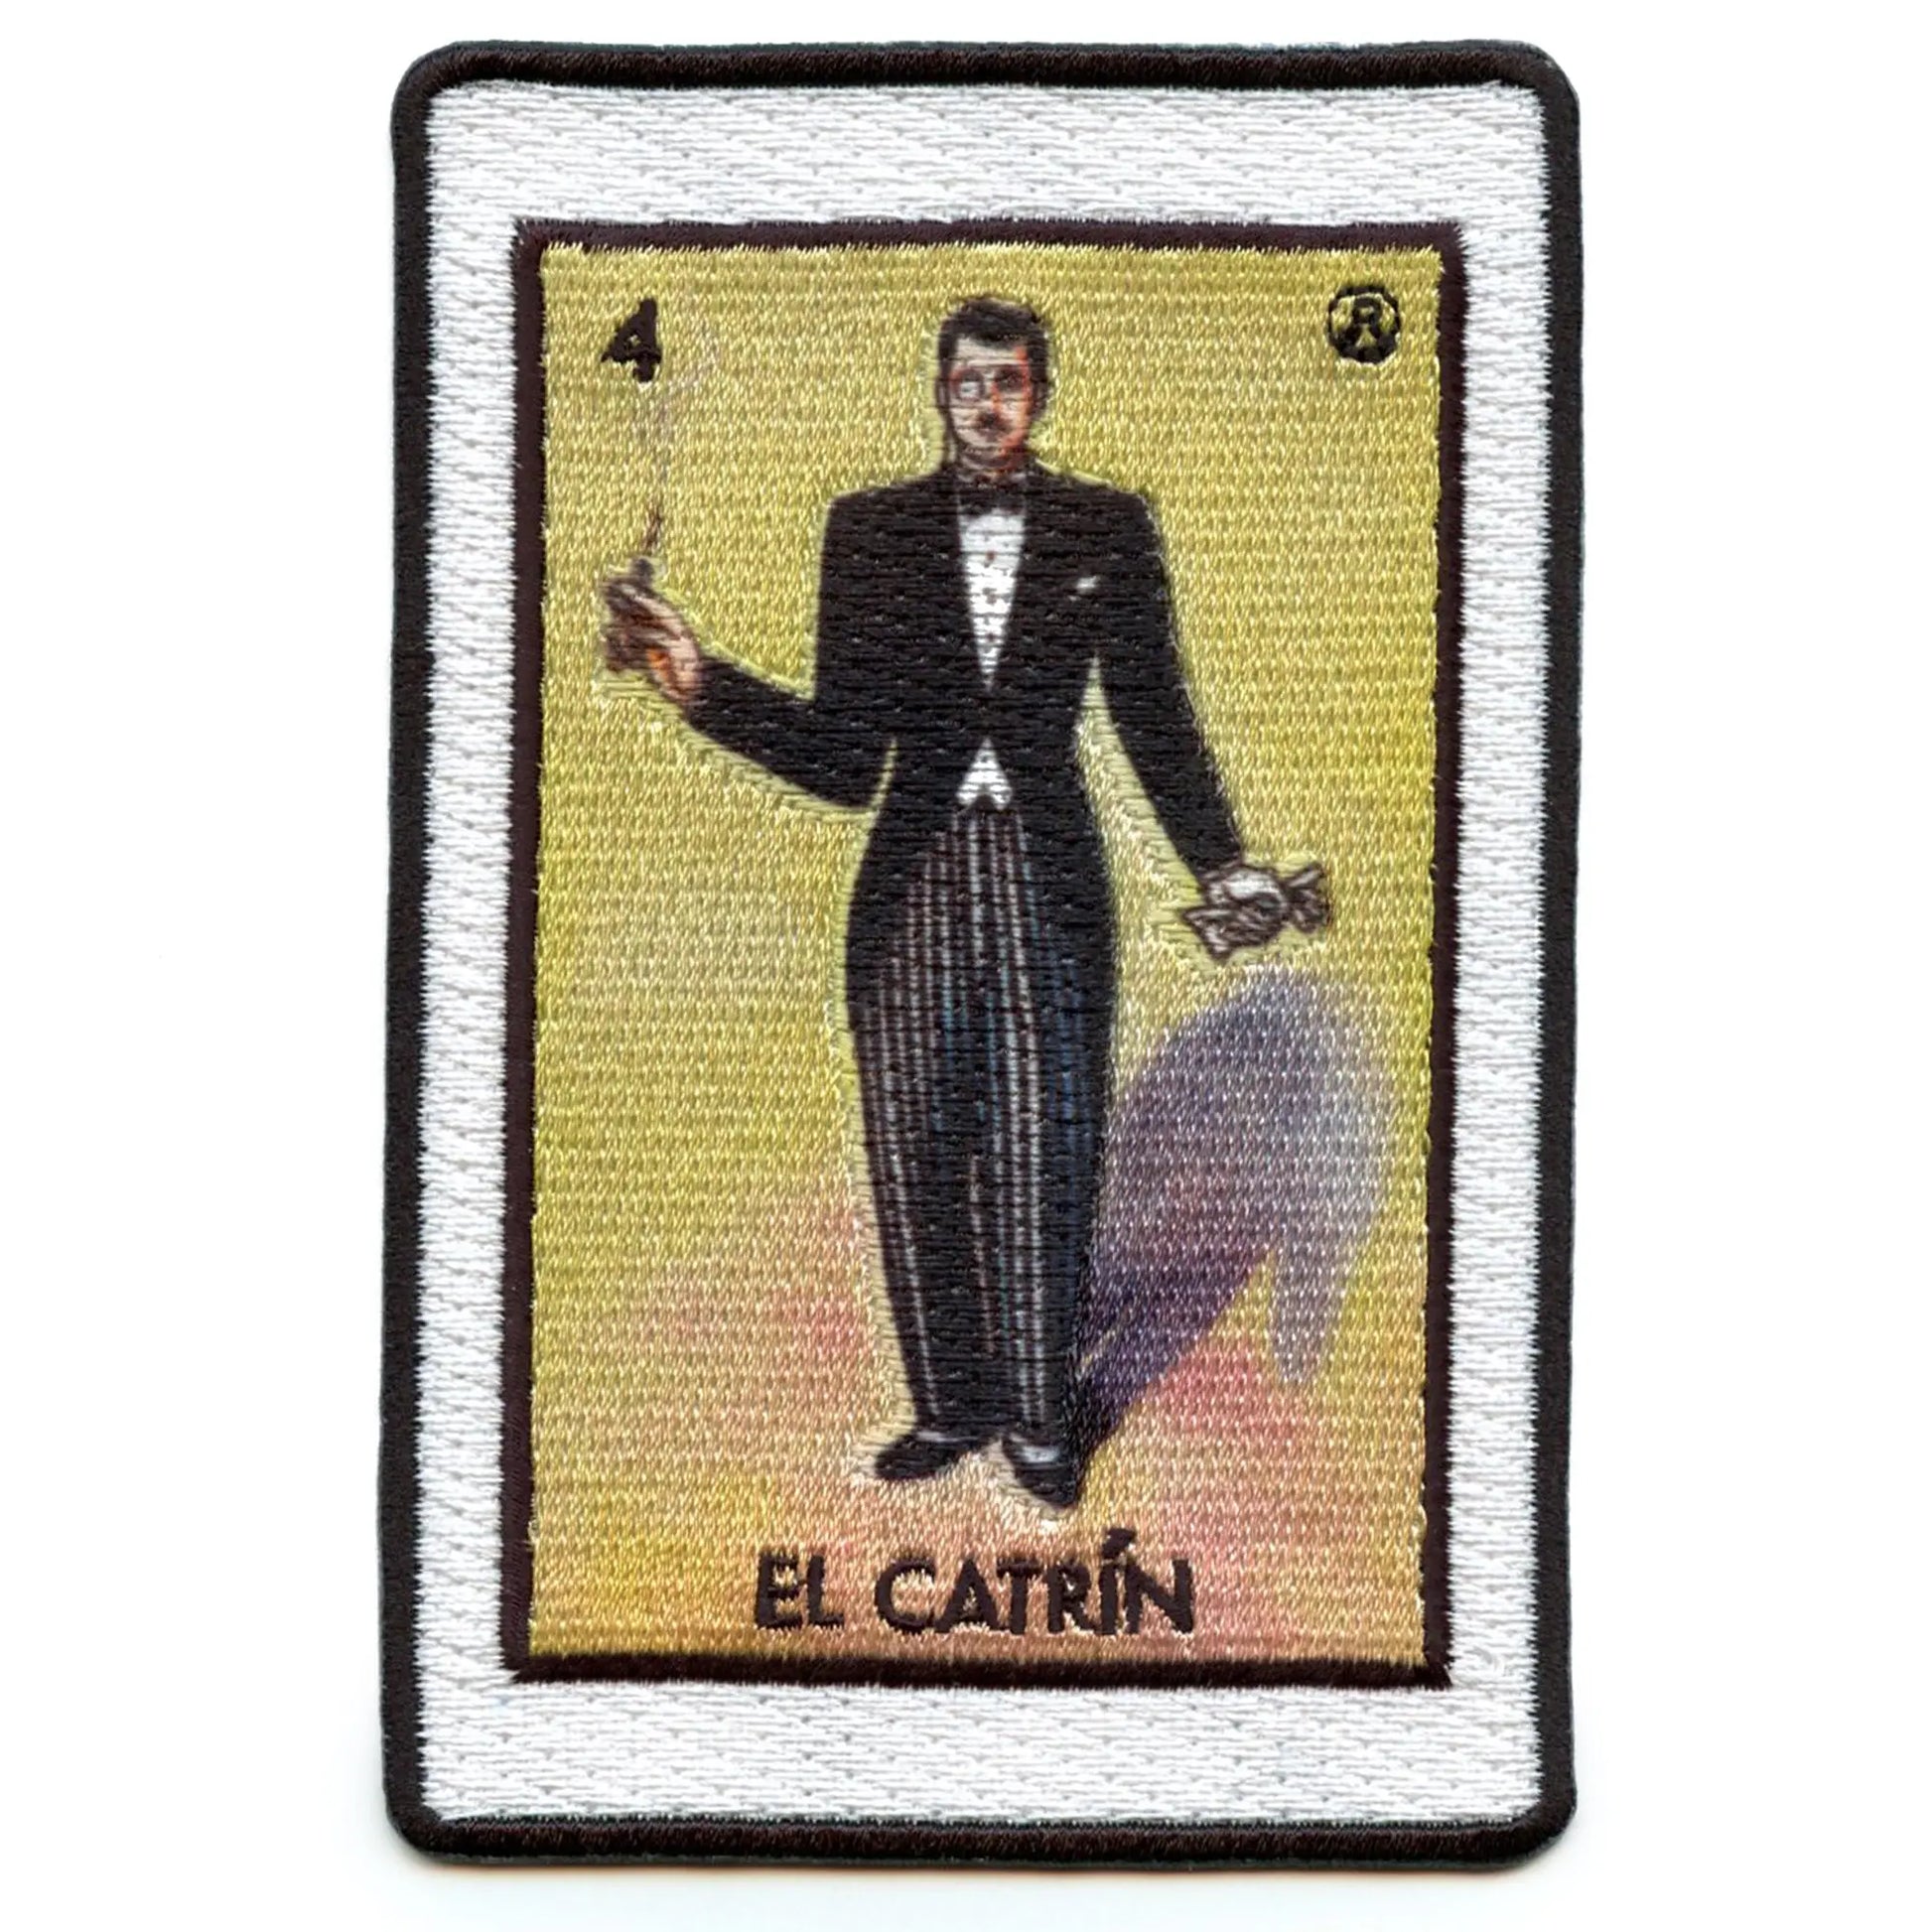 El Catrin 4 Patch Mexican Loteria Card Sublimated Embroidery Iron On